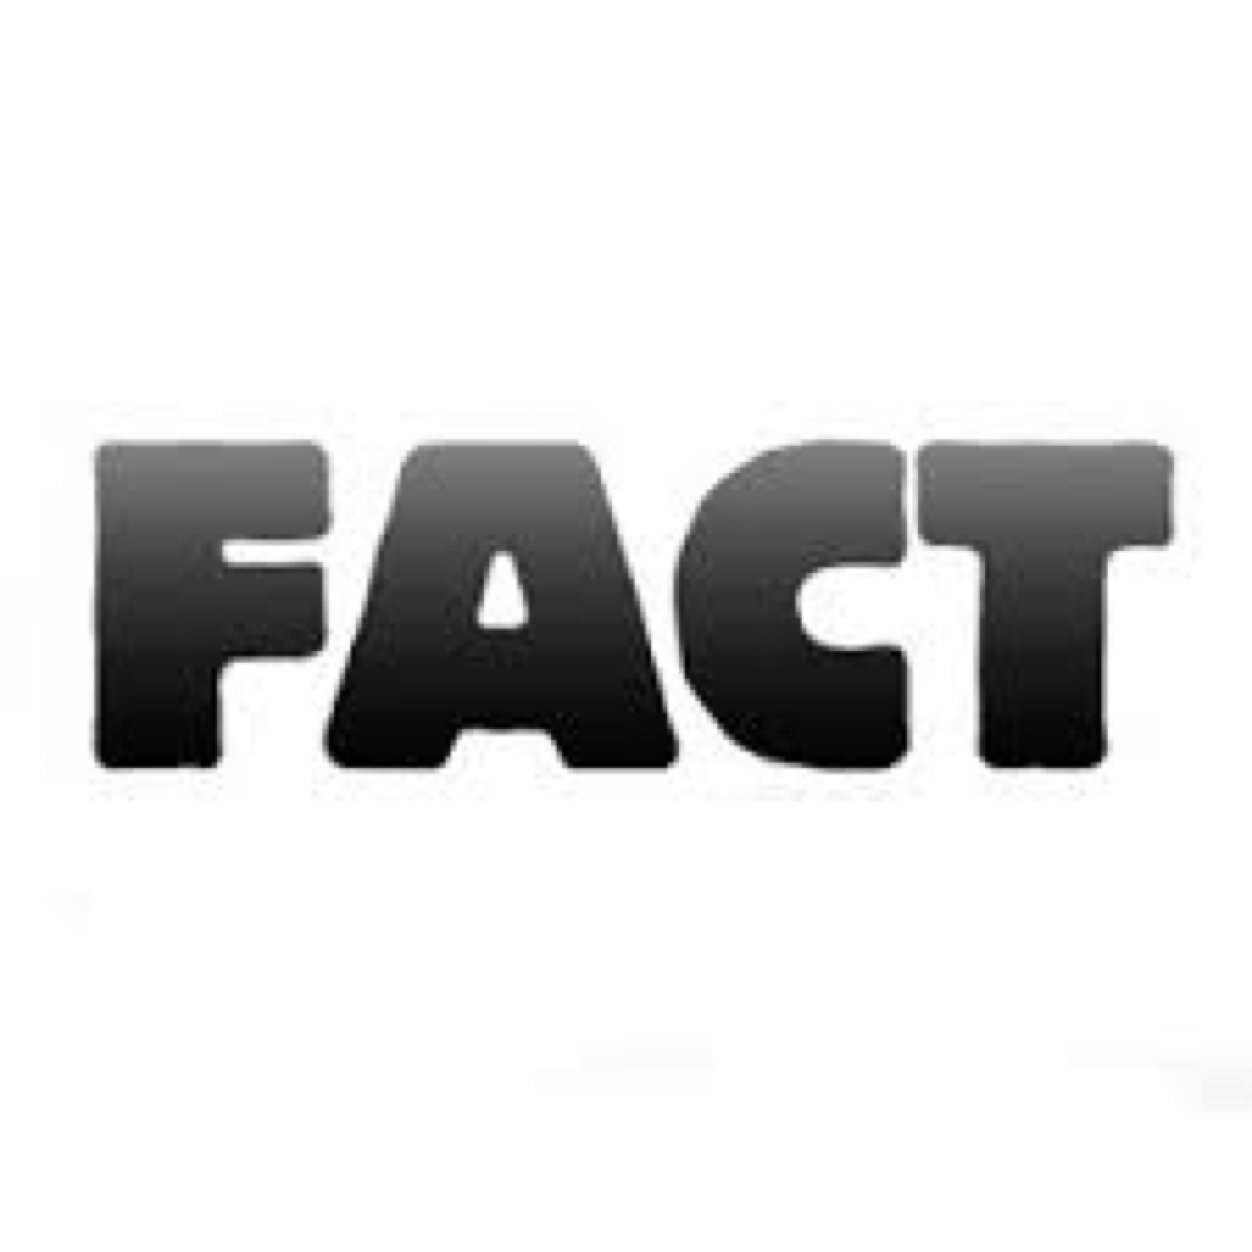 Interesting facts, fun facts, weird facts, I've got them all! Follow my page if these facts make you go 'wow'
Contact: interestingfacts2312@gmail.com